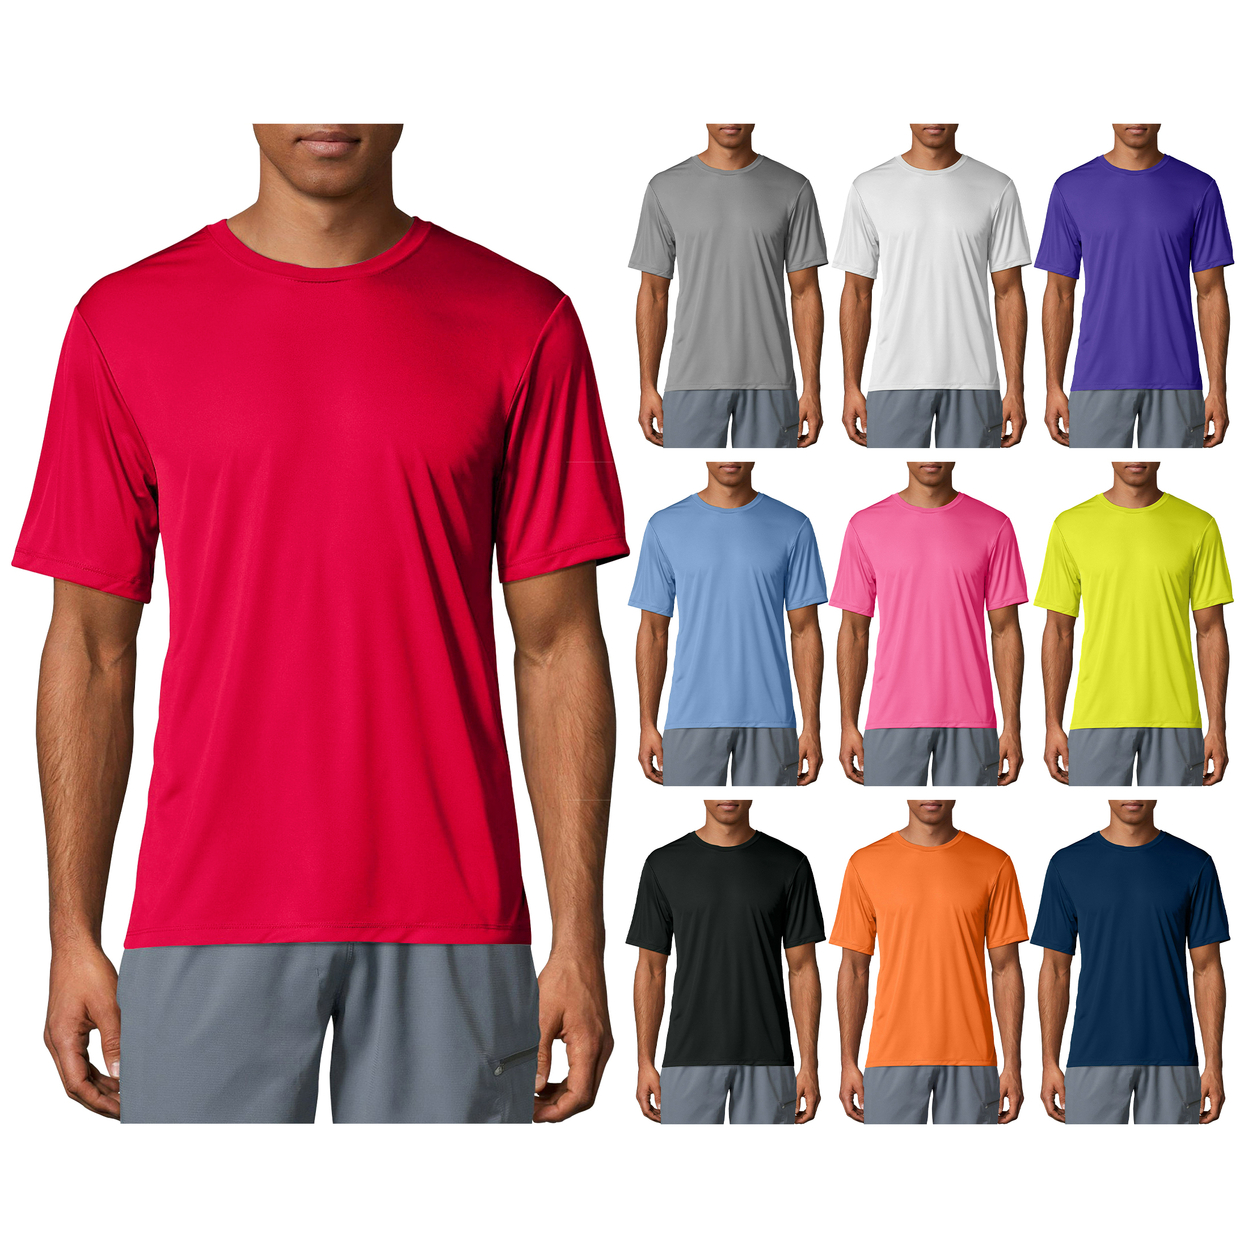 Multi-Pack: Men's Moisture Wicking Cool Dri-Fit Performance Short Sleeve Crew Neck T-Shirts - 3-pack, X-large